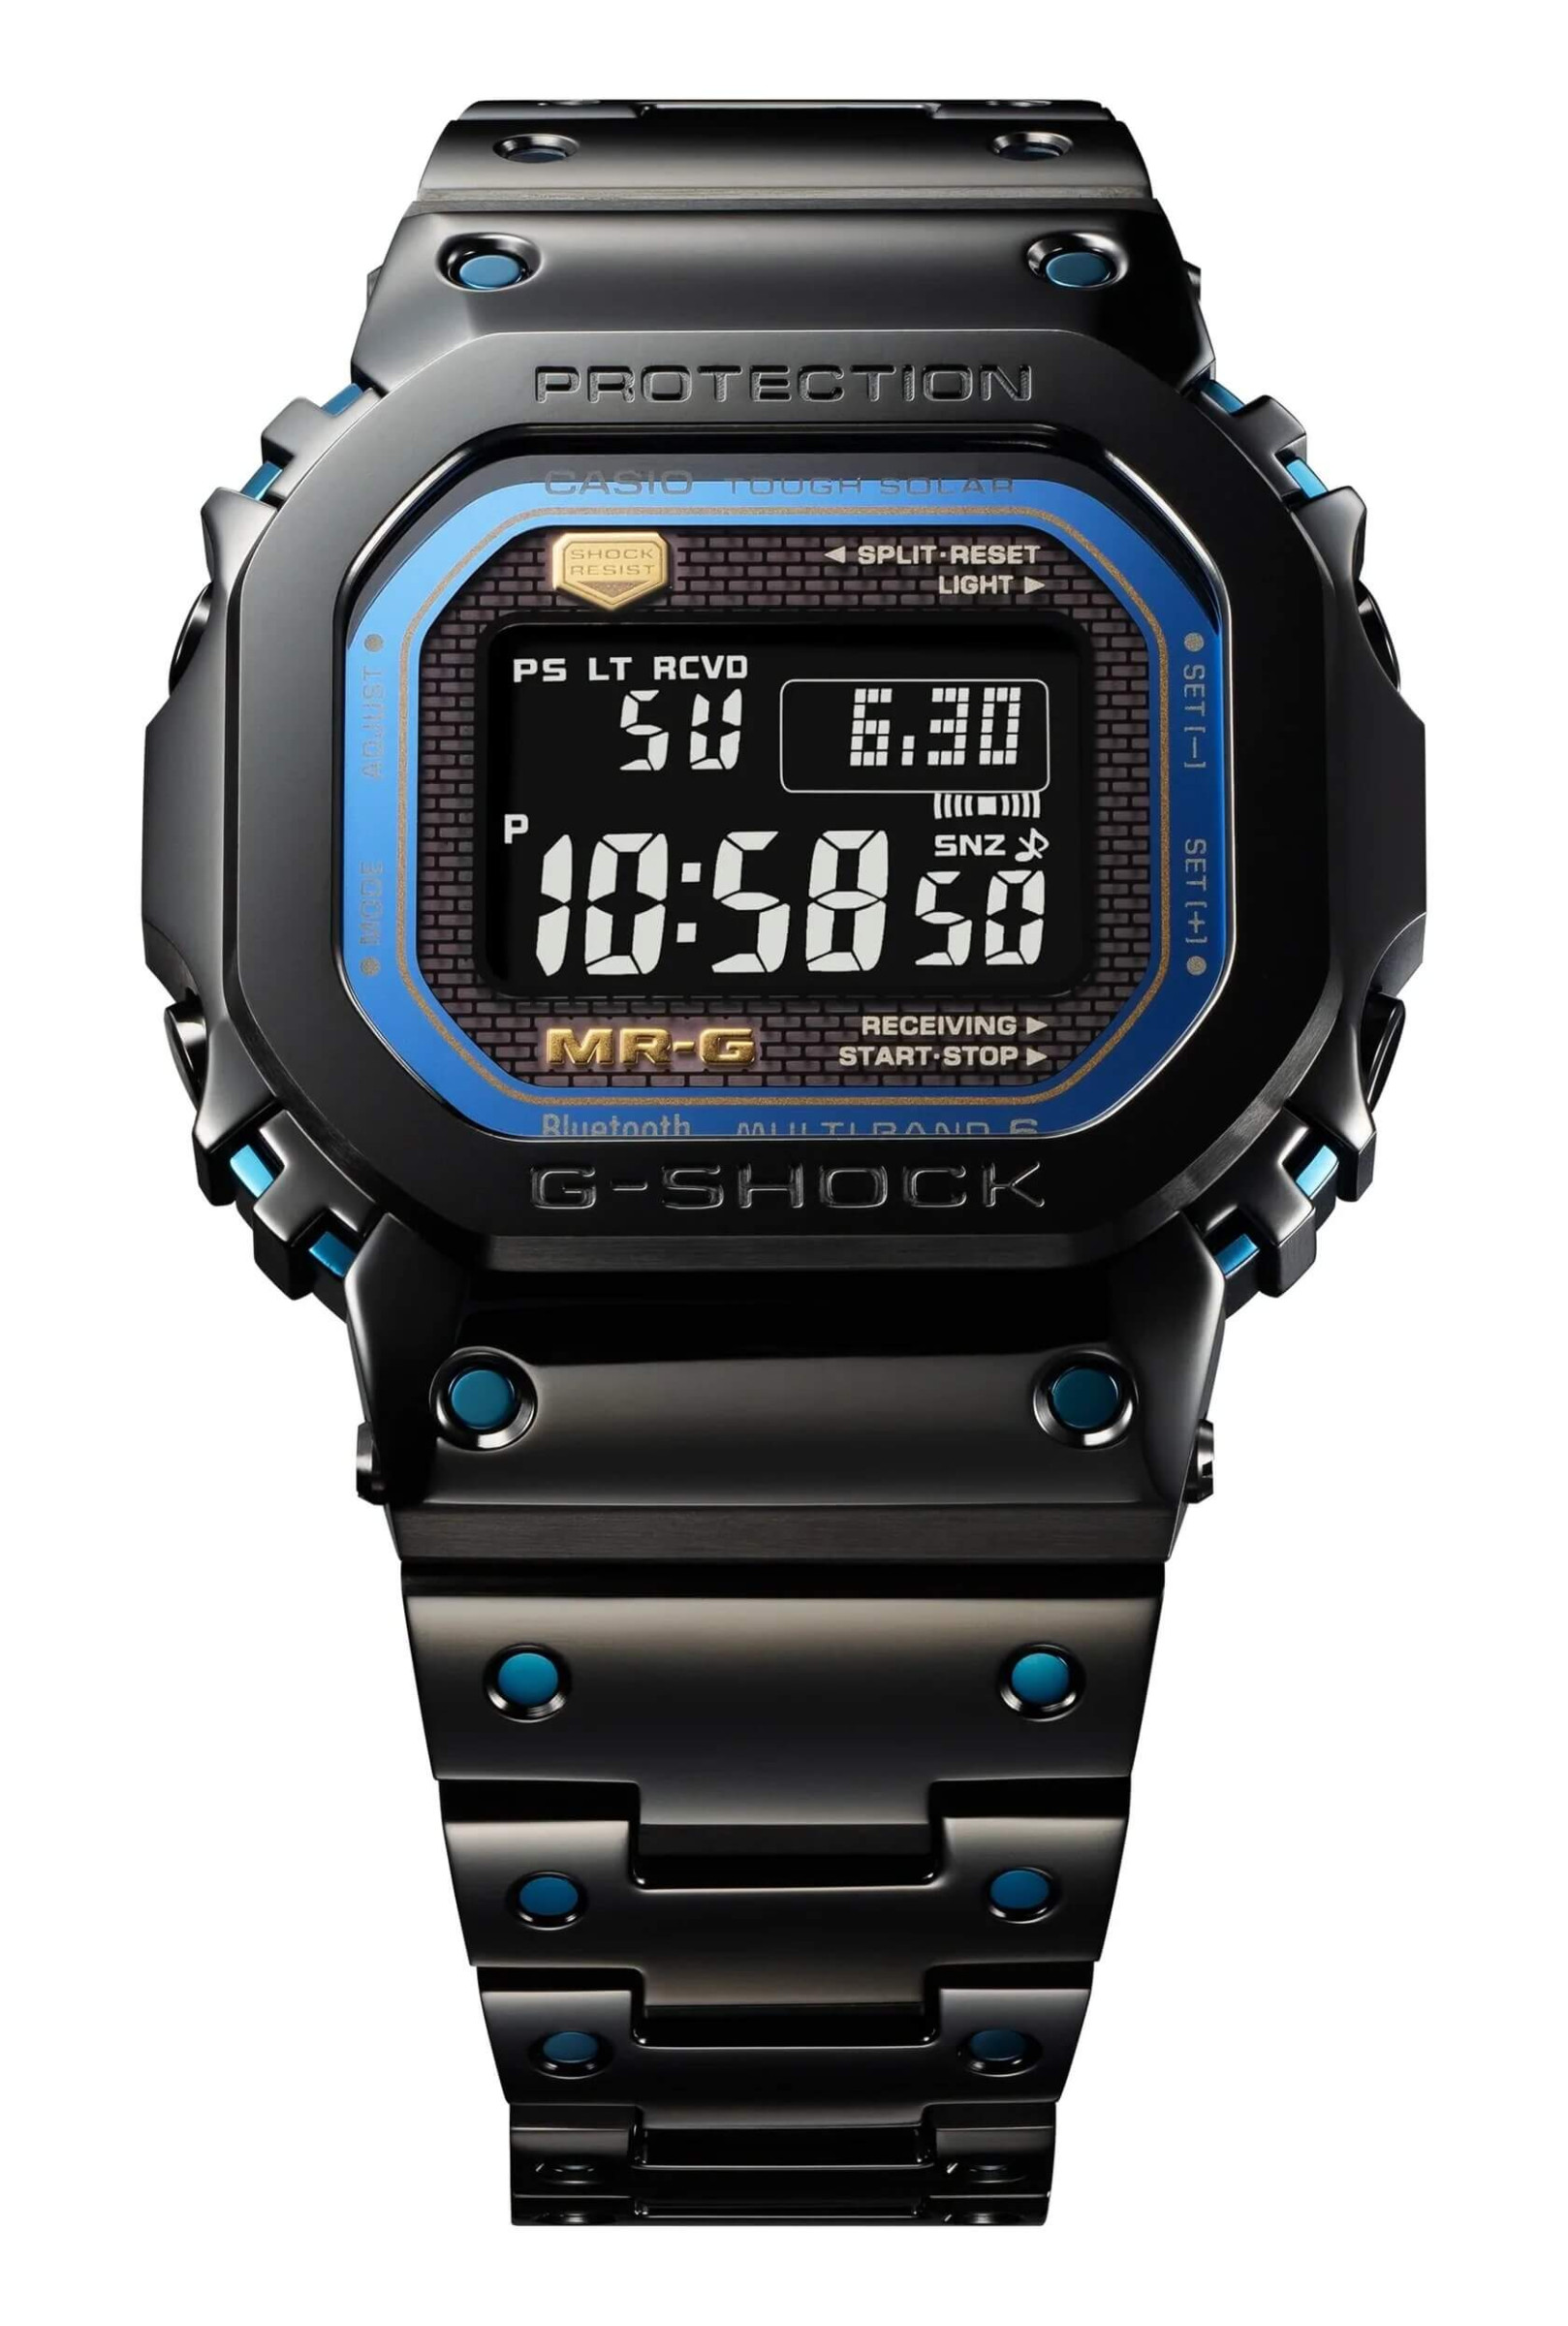 G-Shock MR-G Kiwami. Watch band with black diamond-like coating and blue accents.